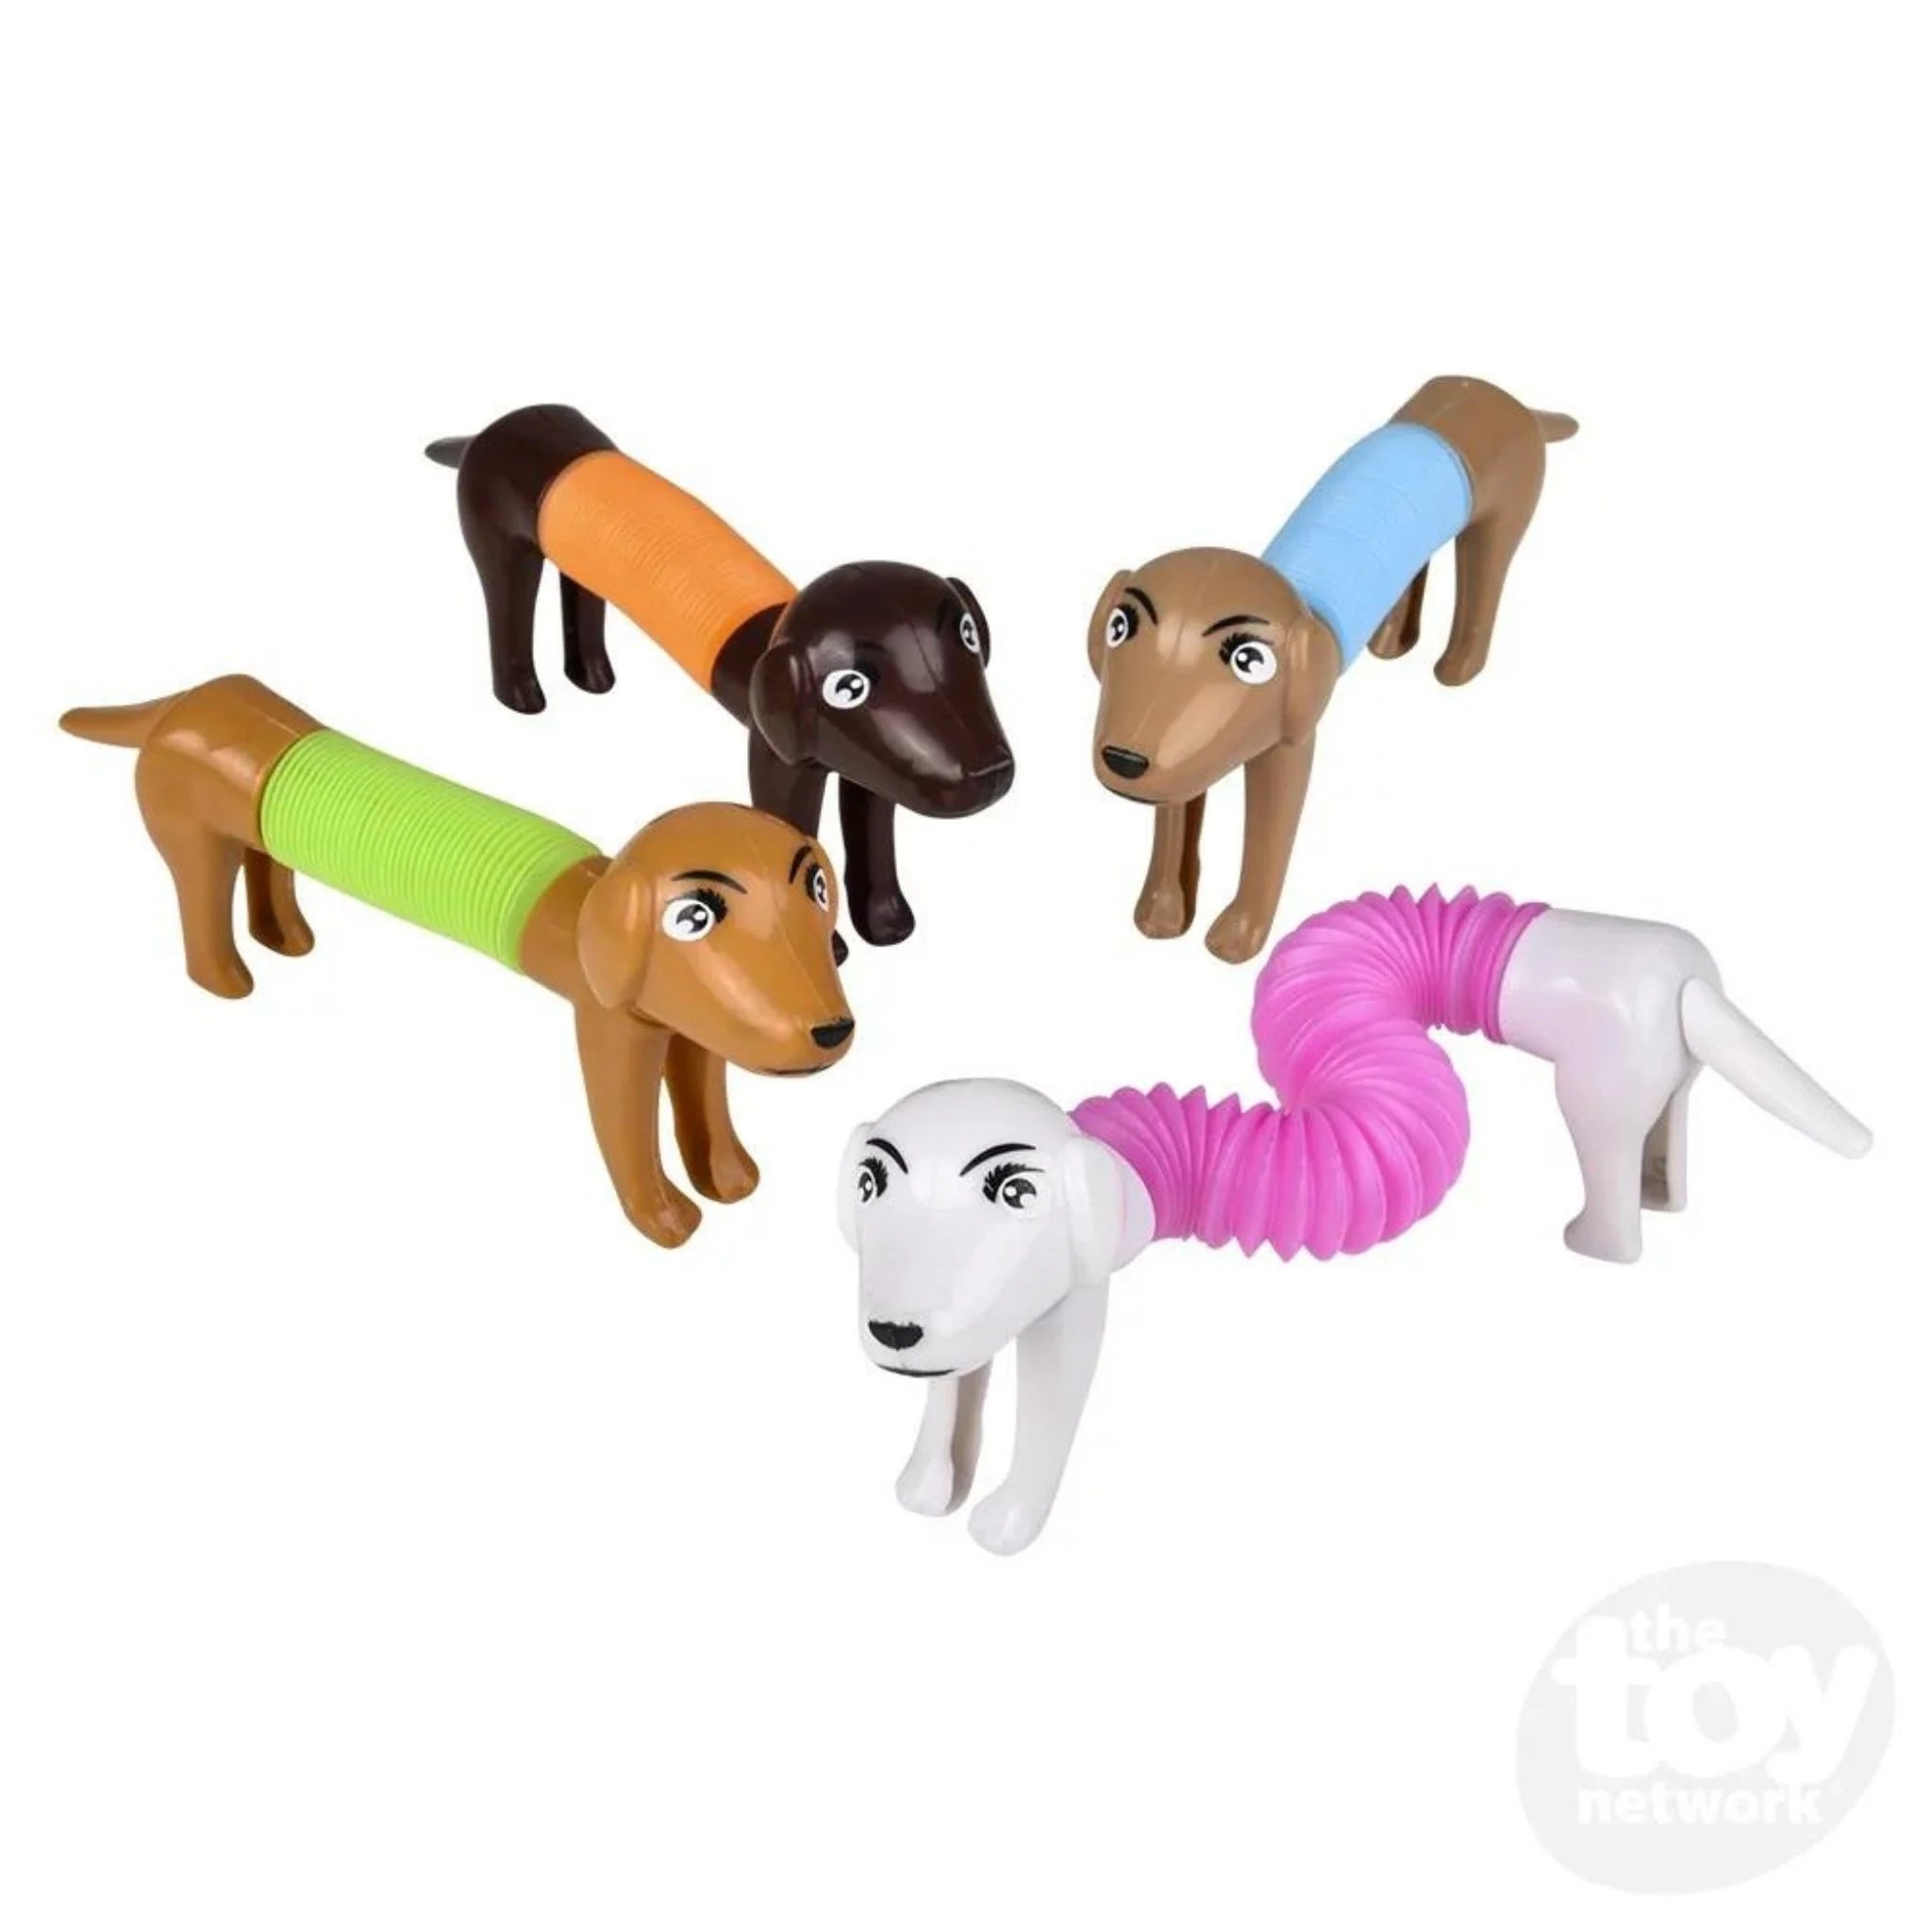 Wiener Dog Expanding Tube Toys - 12 Pc.